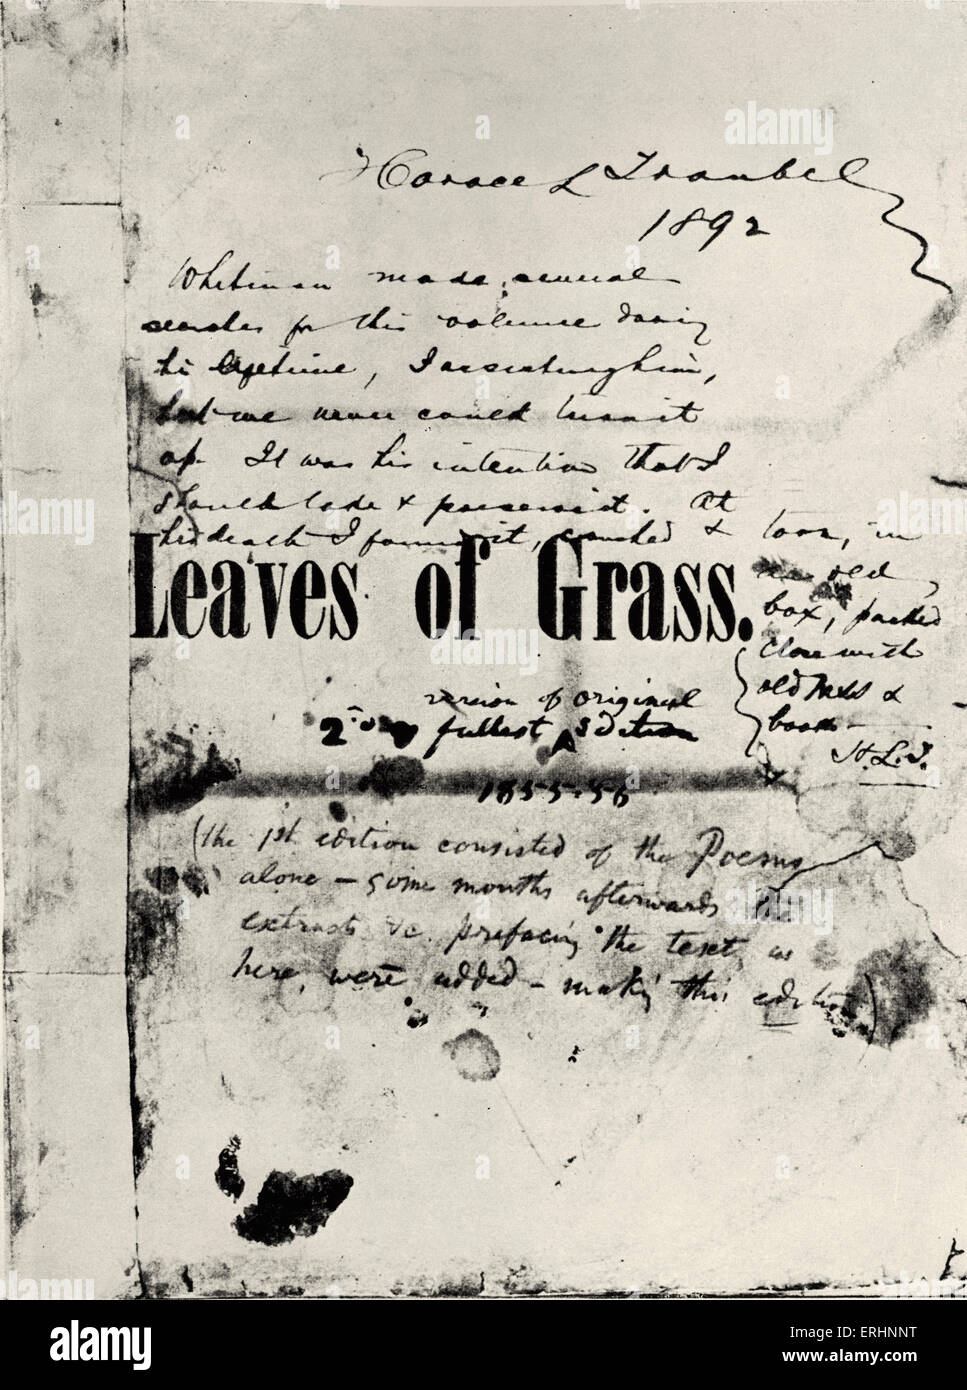 Leaves of Grass - Walt Whitman's copy of the first edition of his book 'Leaves of Grass', with handwritten notes by Horace L. Stock Photo